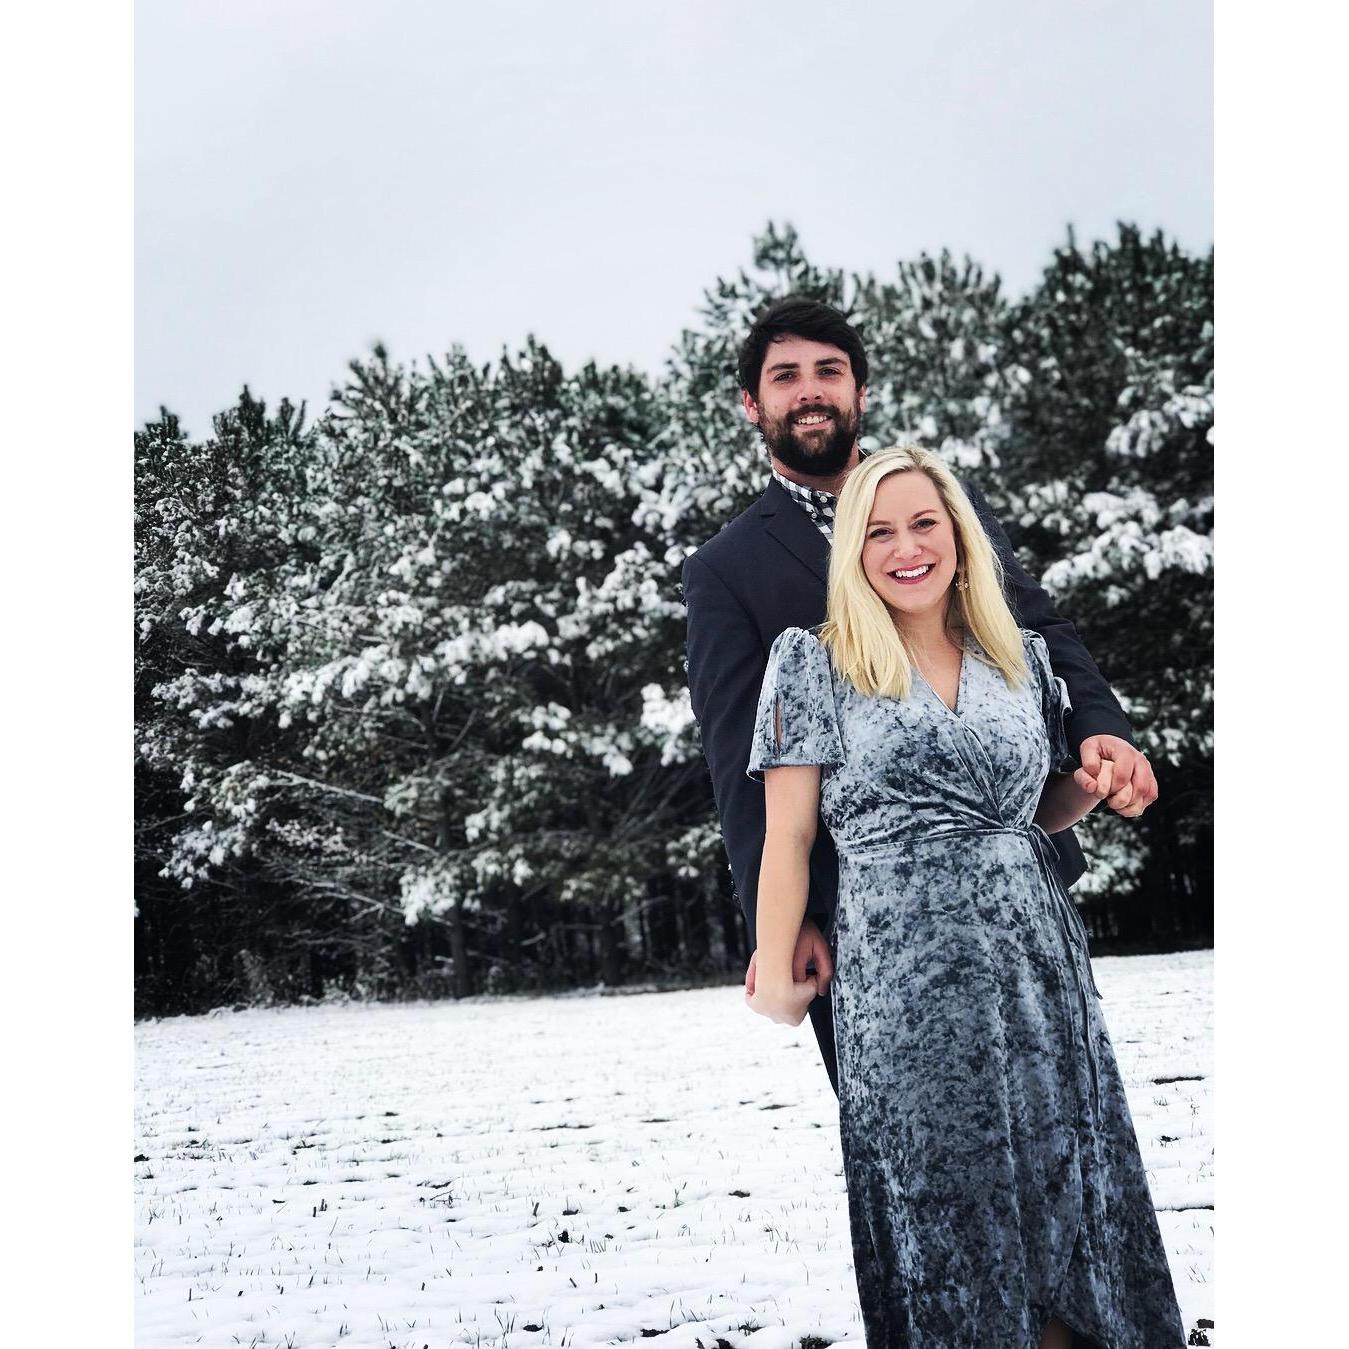 Spur of the moment snow day engagement pic session!